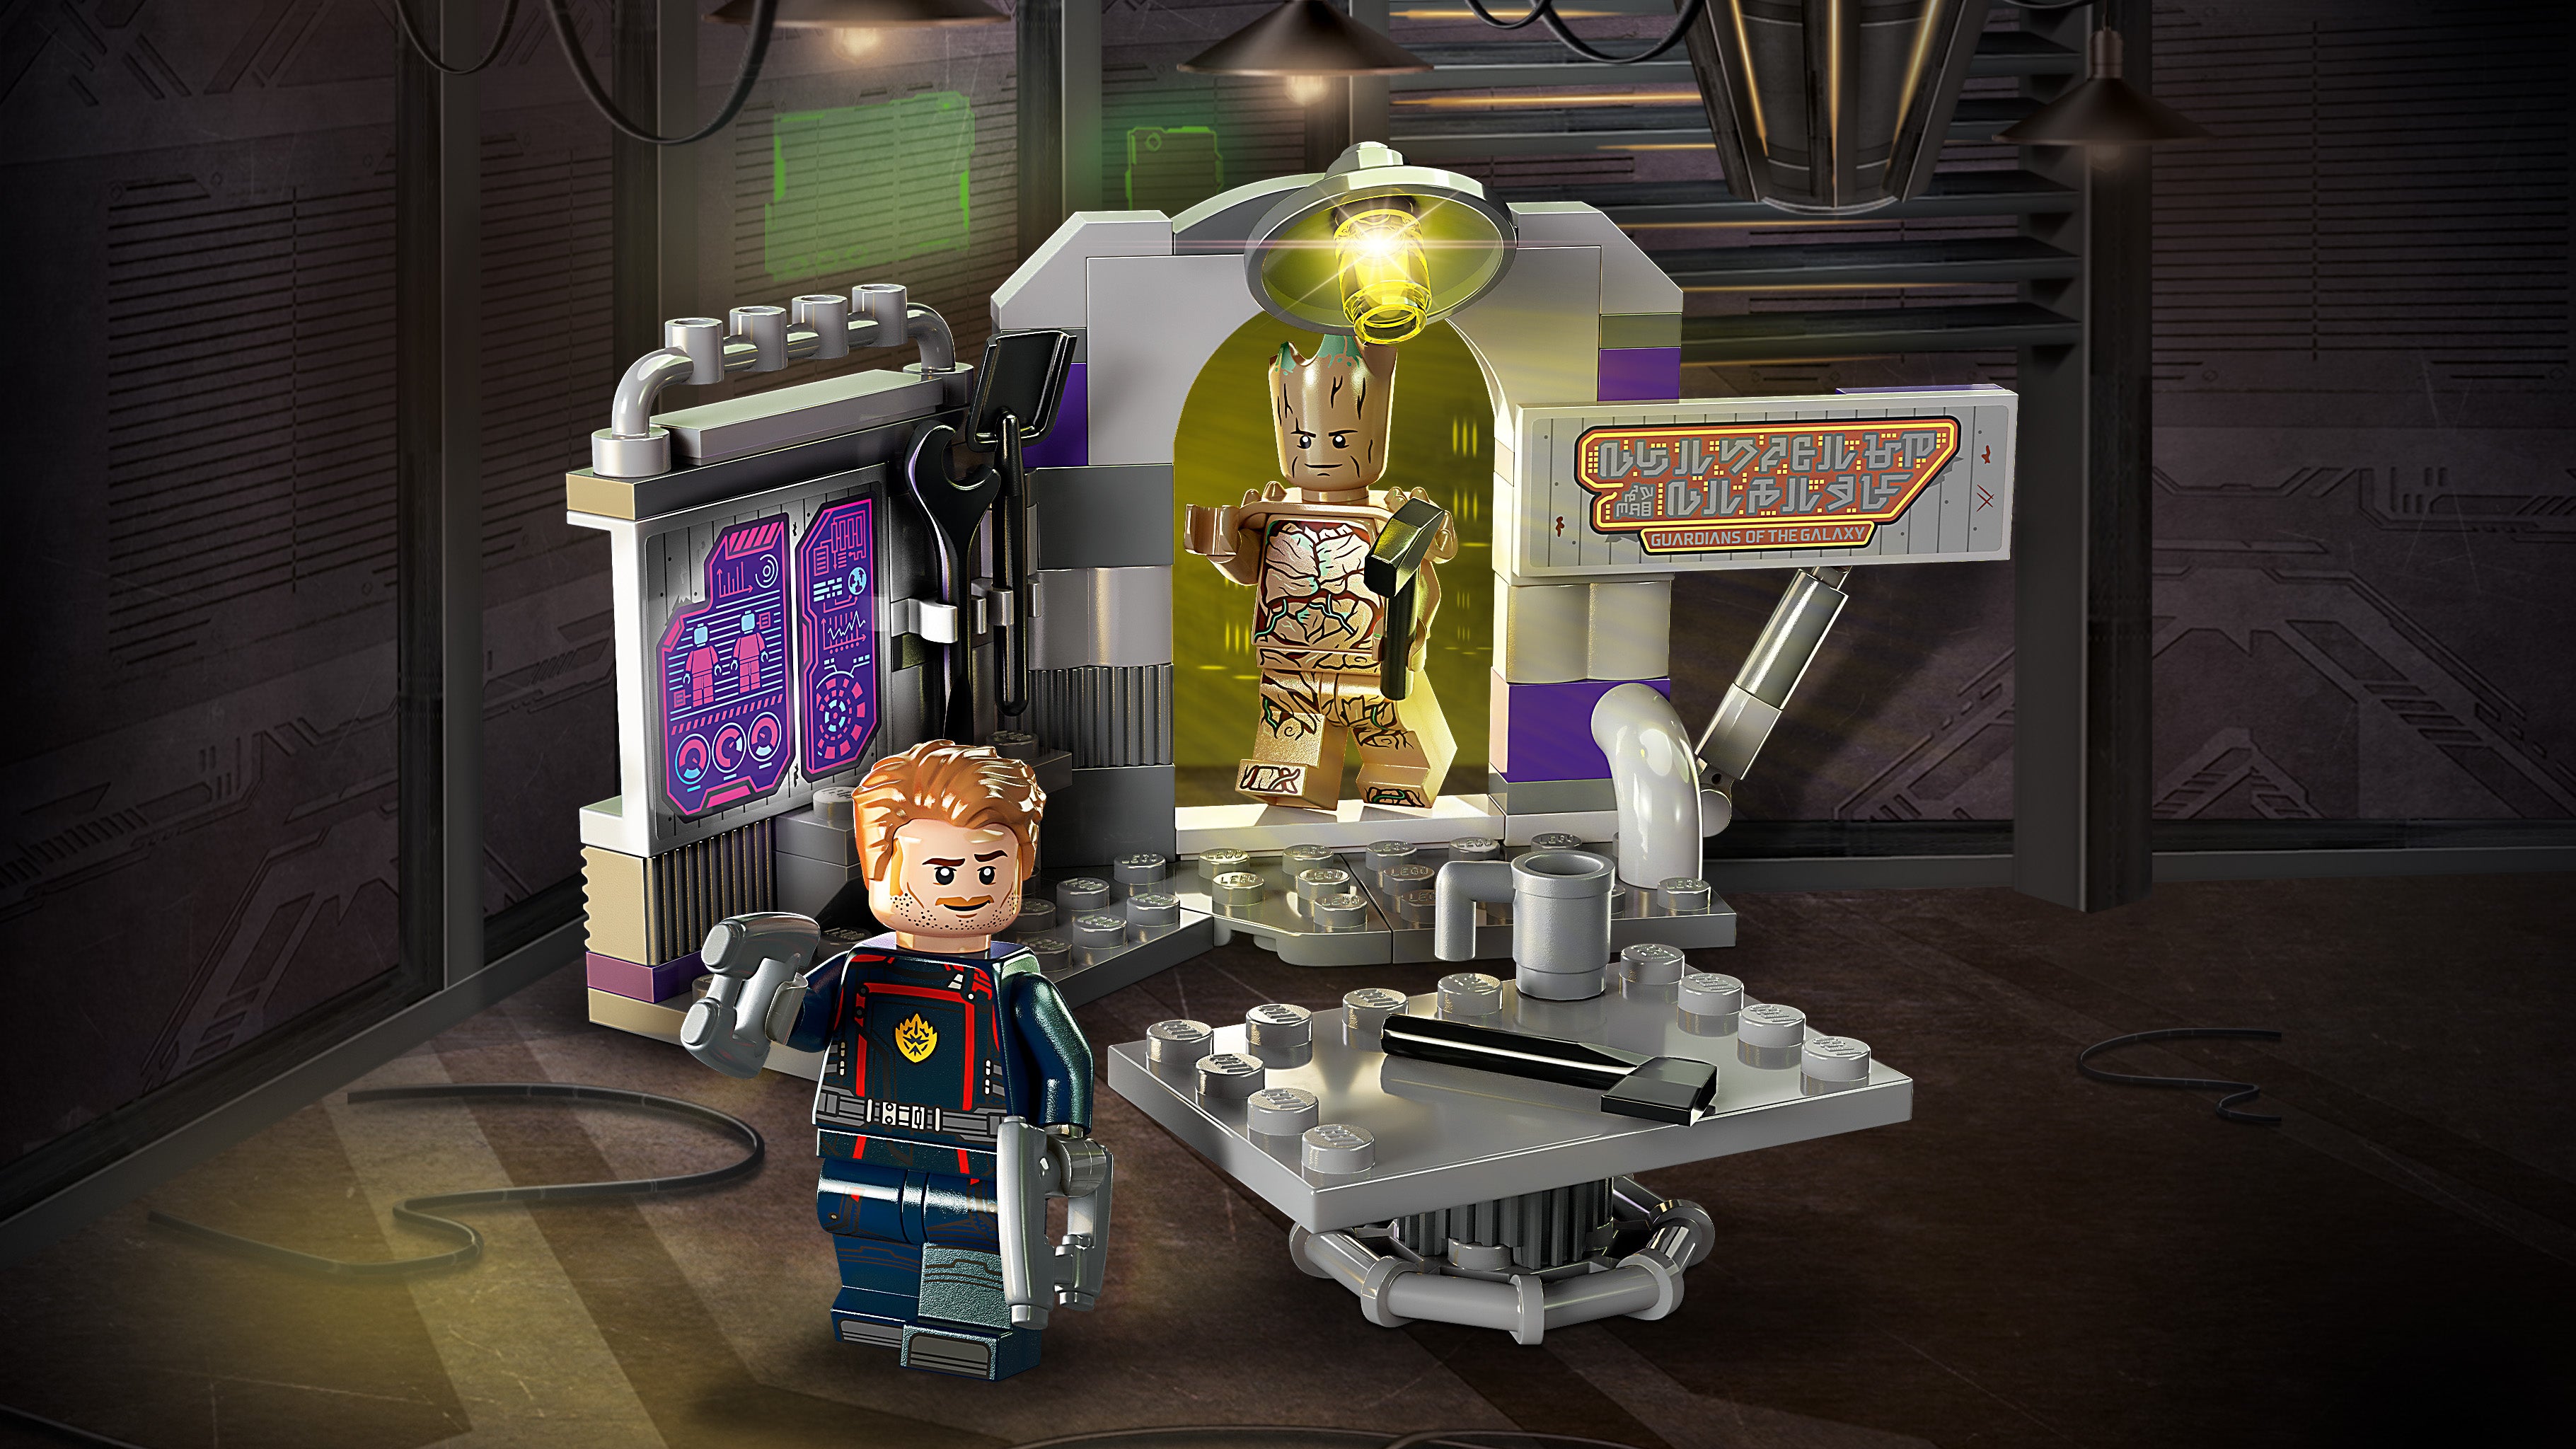 Lego 76253 Guardians of the Galaxy HeadQuarters